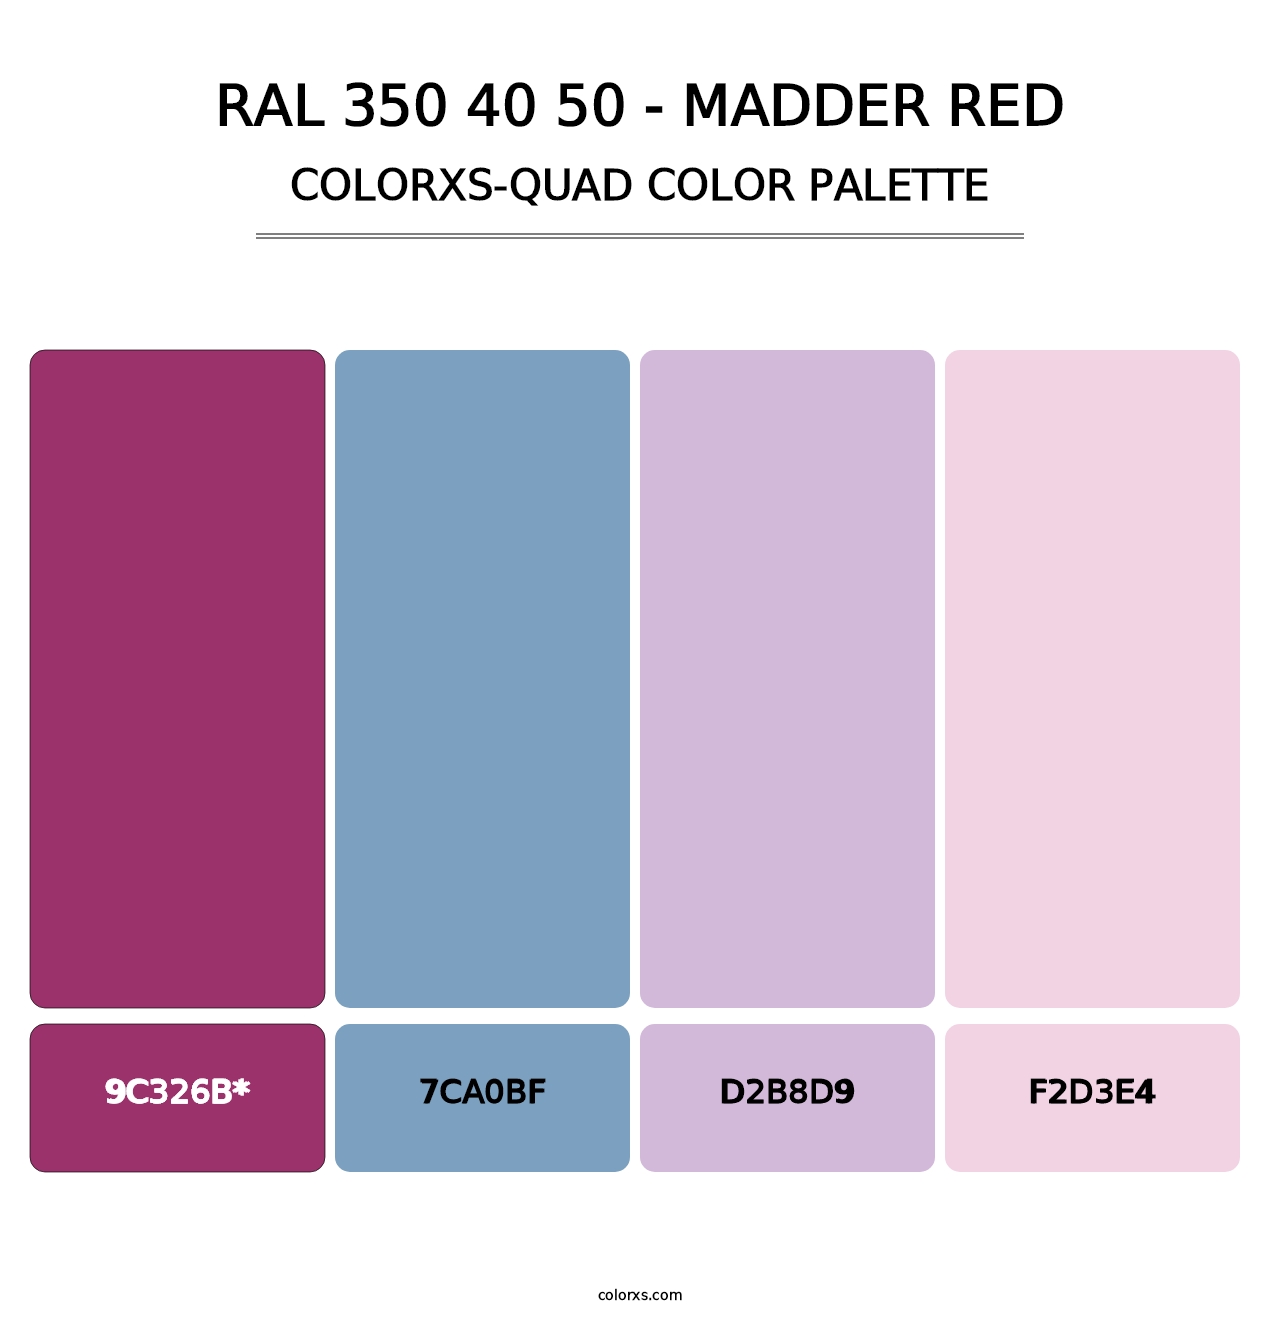 RAL 350 40 50 - Madder Red - Colorxs Quad Palette